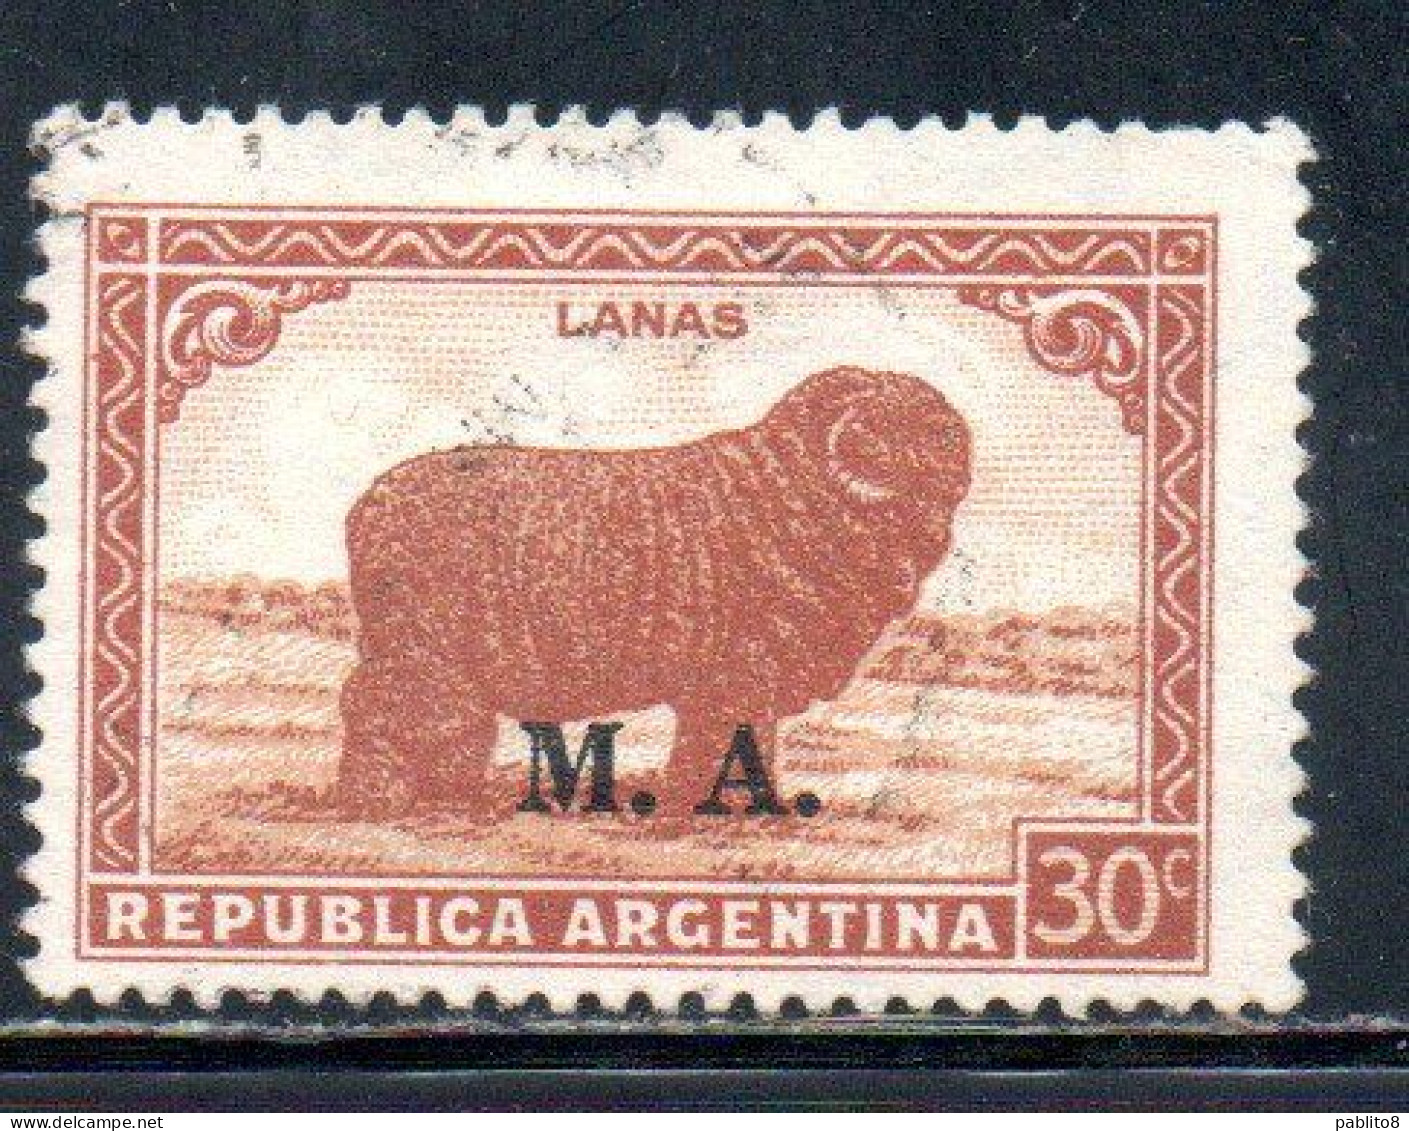 ARGENTINA 1935 1937 OFFICIAL DEPARTMENT STAMP OVERPRINTED M.A. MINISTRY OF AGRICULTURE MA 30c USED USADO - Servizio